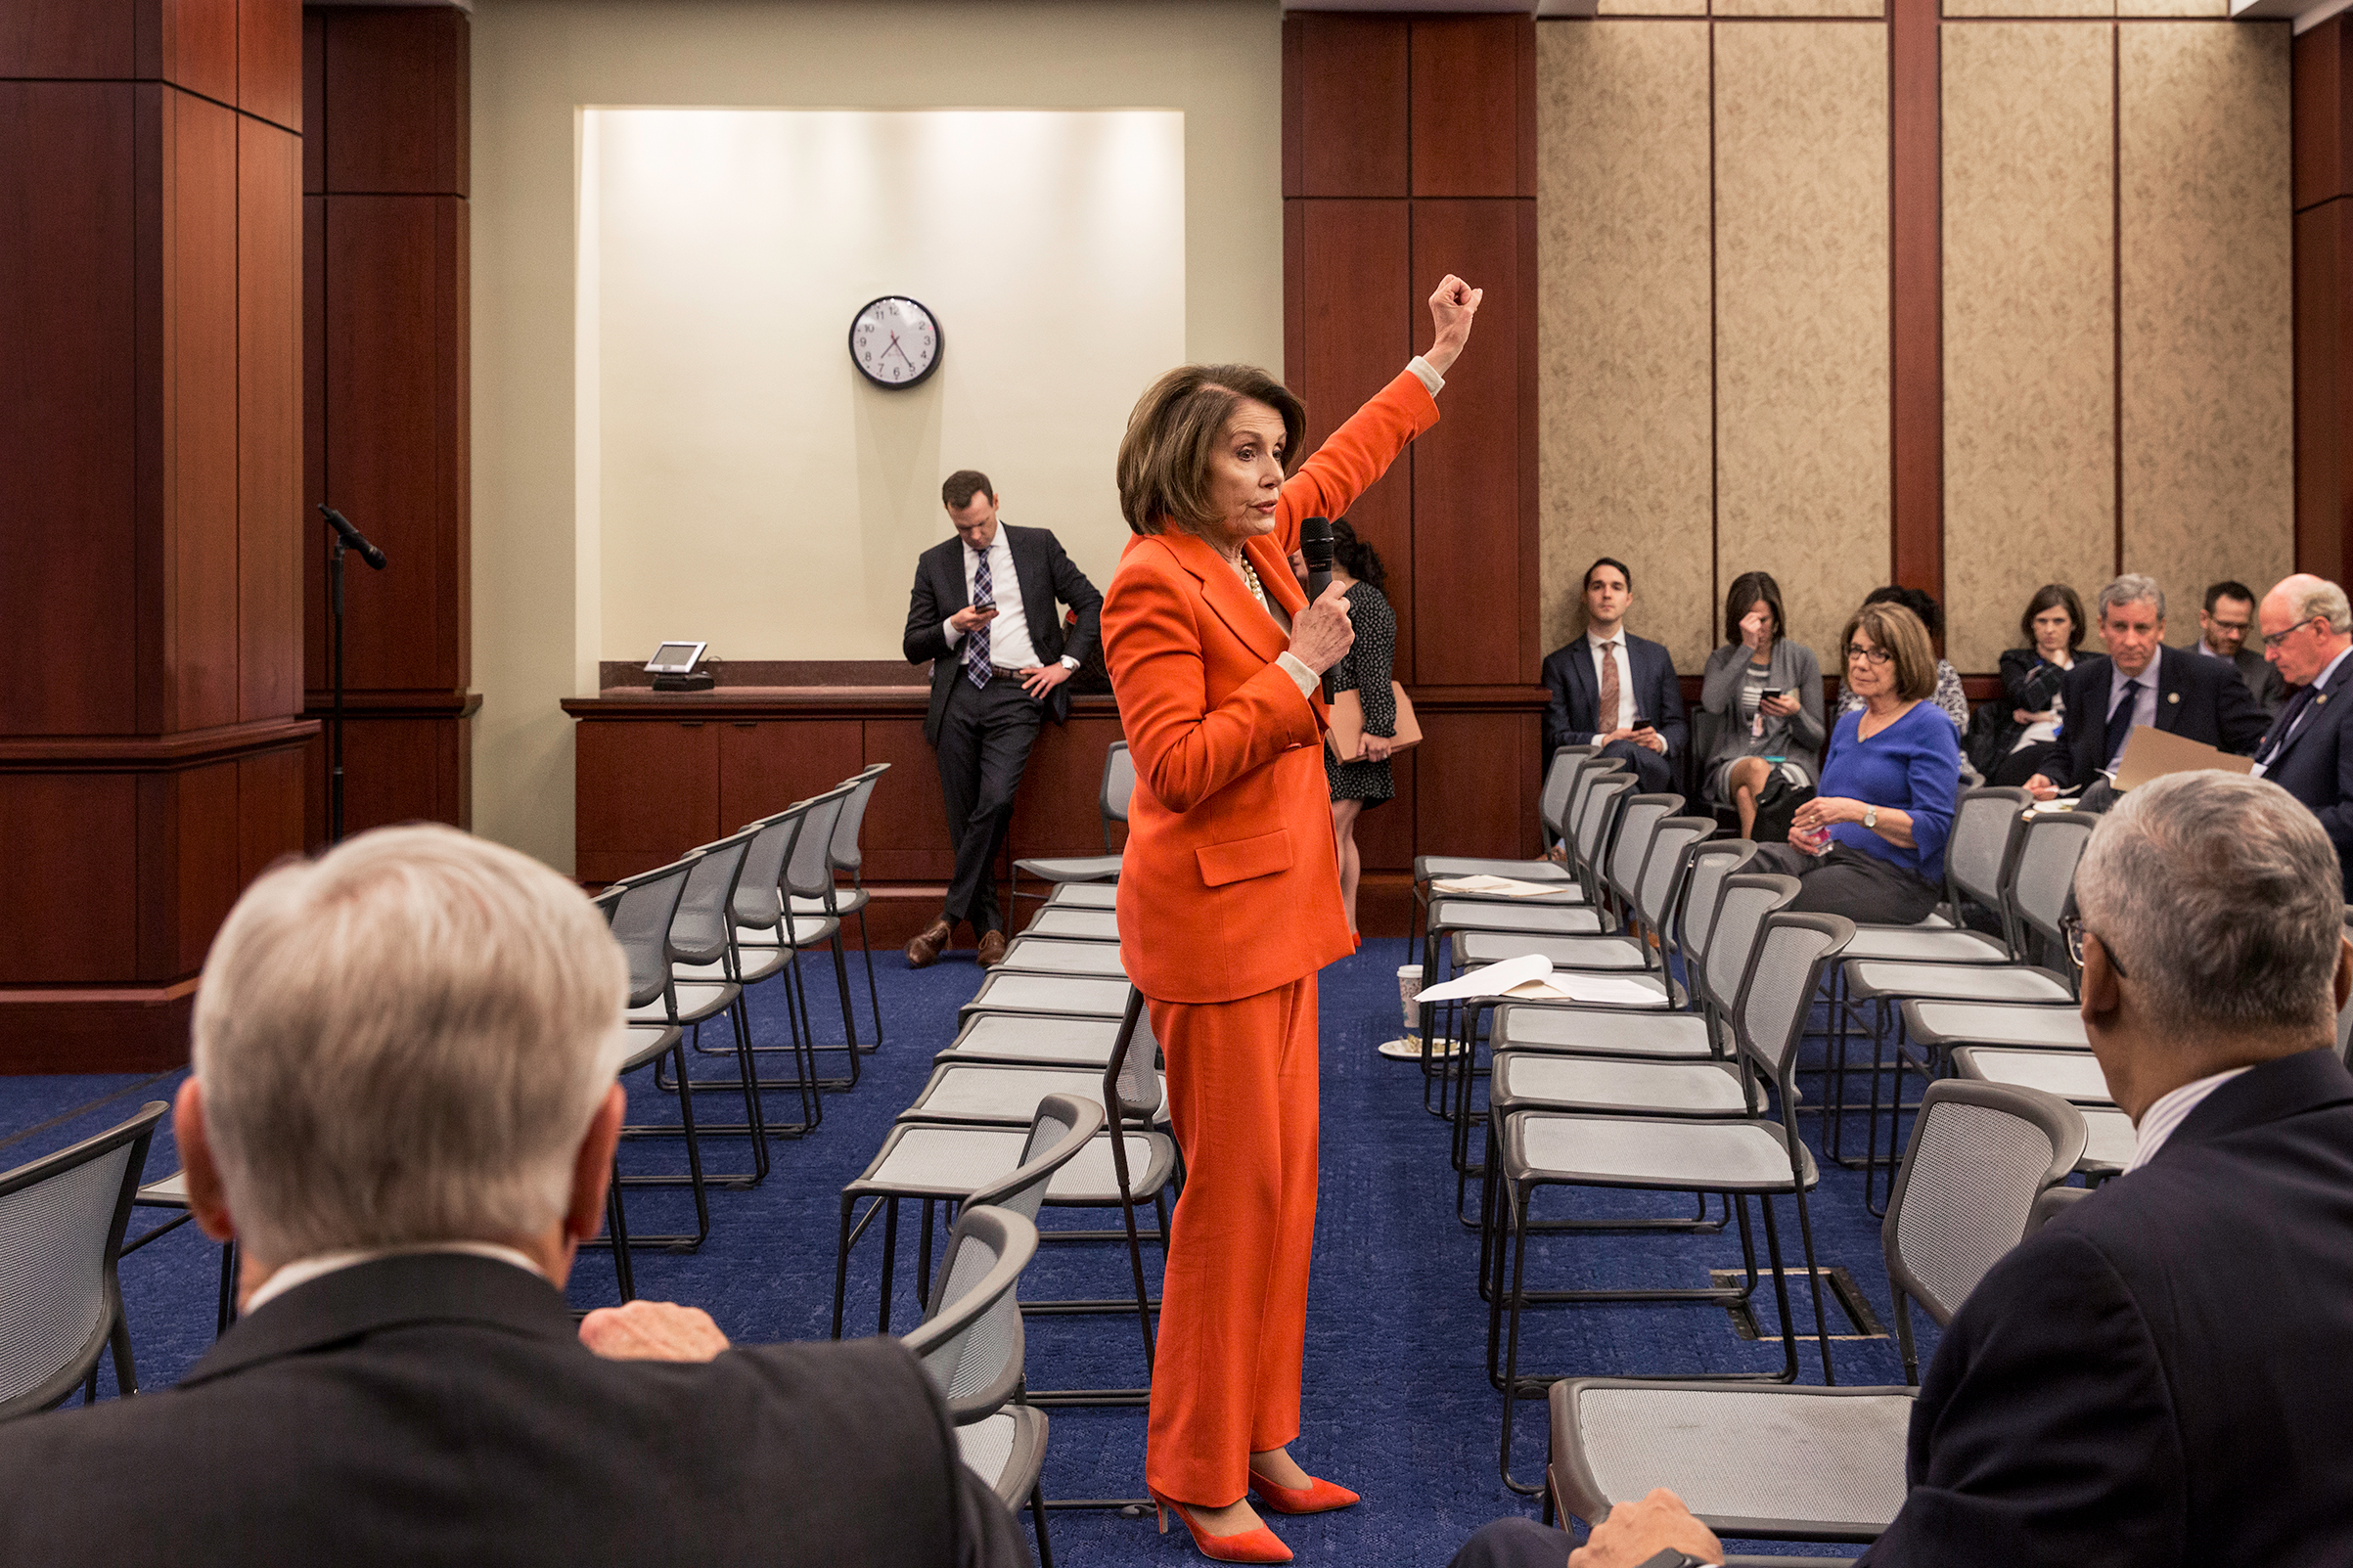 Pelosi addresses members of her caucus during a meeting in February (Gillian Laub for TIME)